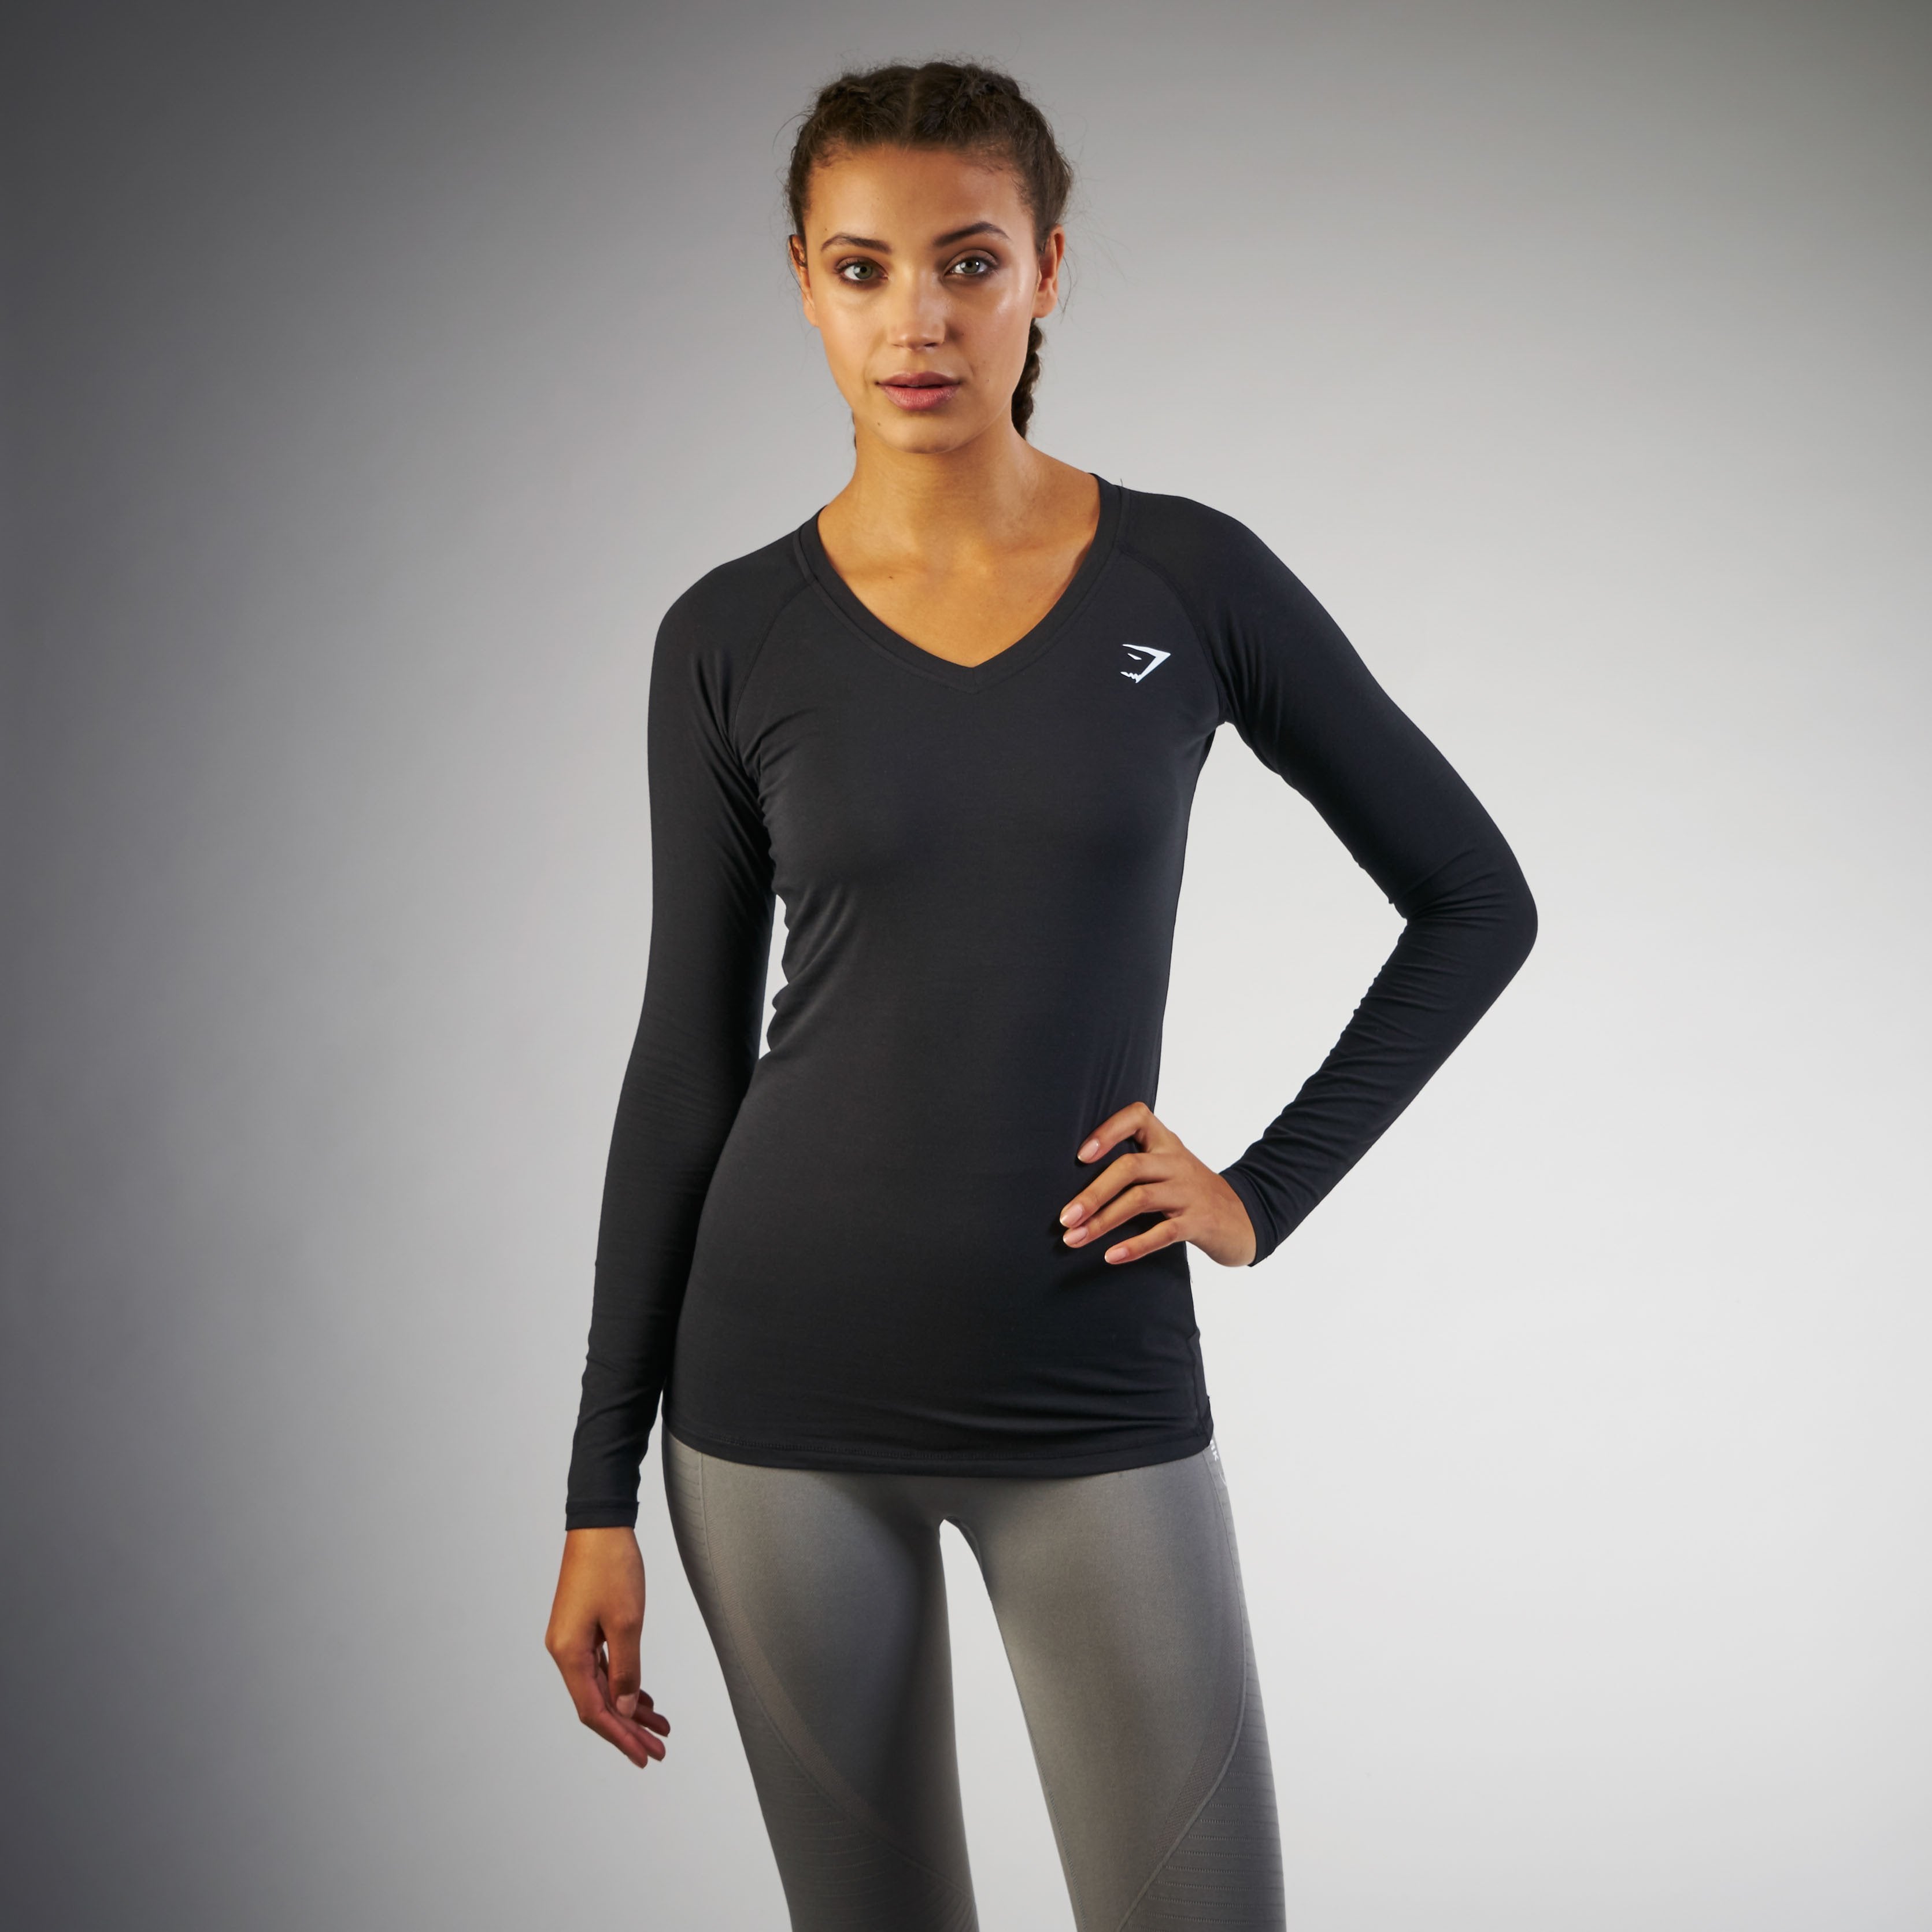 Verve Long Sleeve T-Shirt in Black - view 1